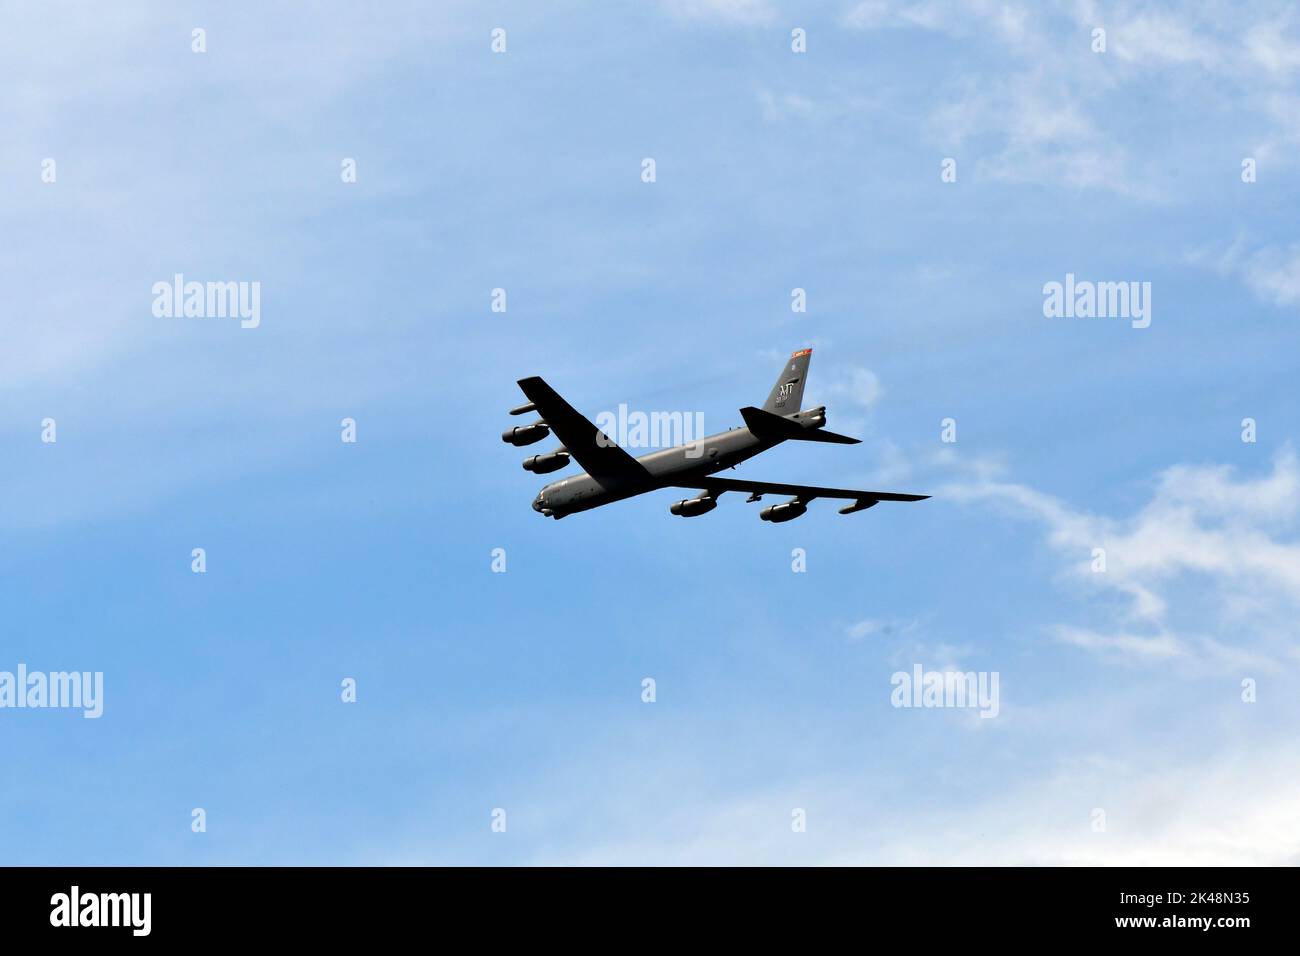 Zeltweg, Austria - September 03, 2022: Public airshow in Styria named Airpower 22, overflight of a B-52 Stratofortress bomber Stock Photo